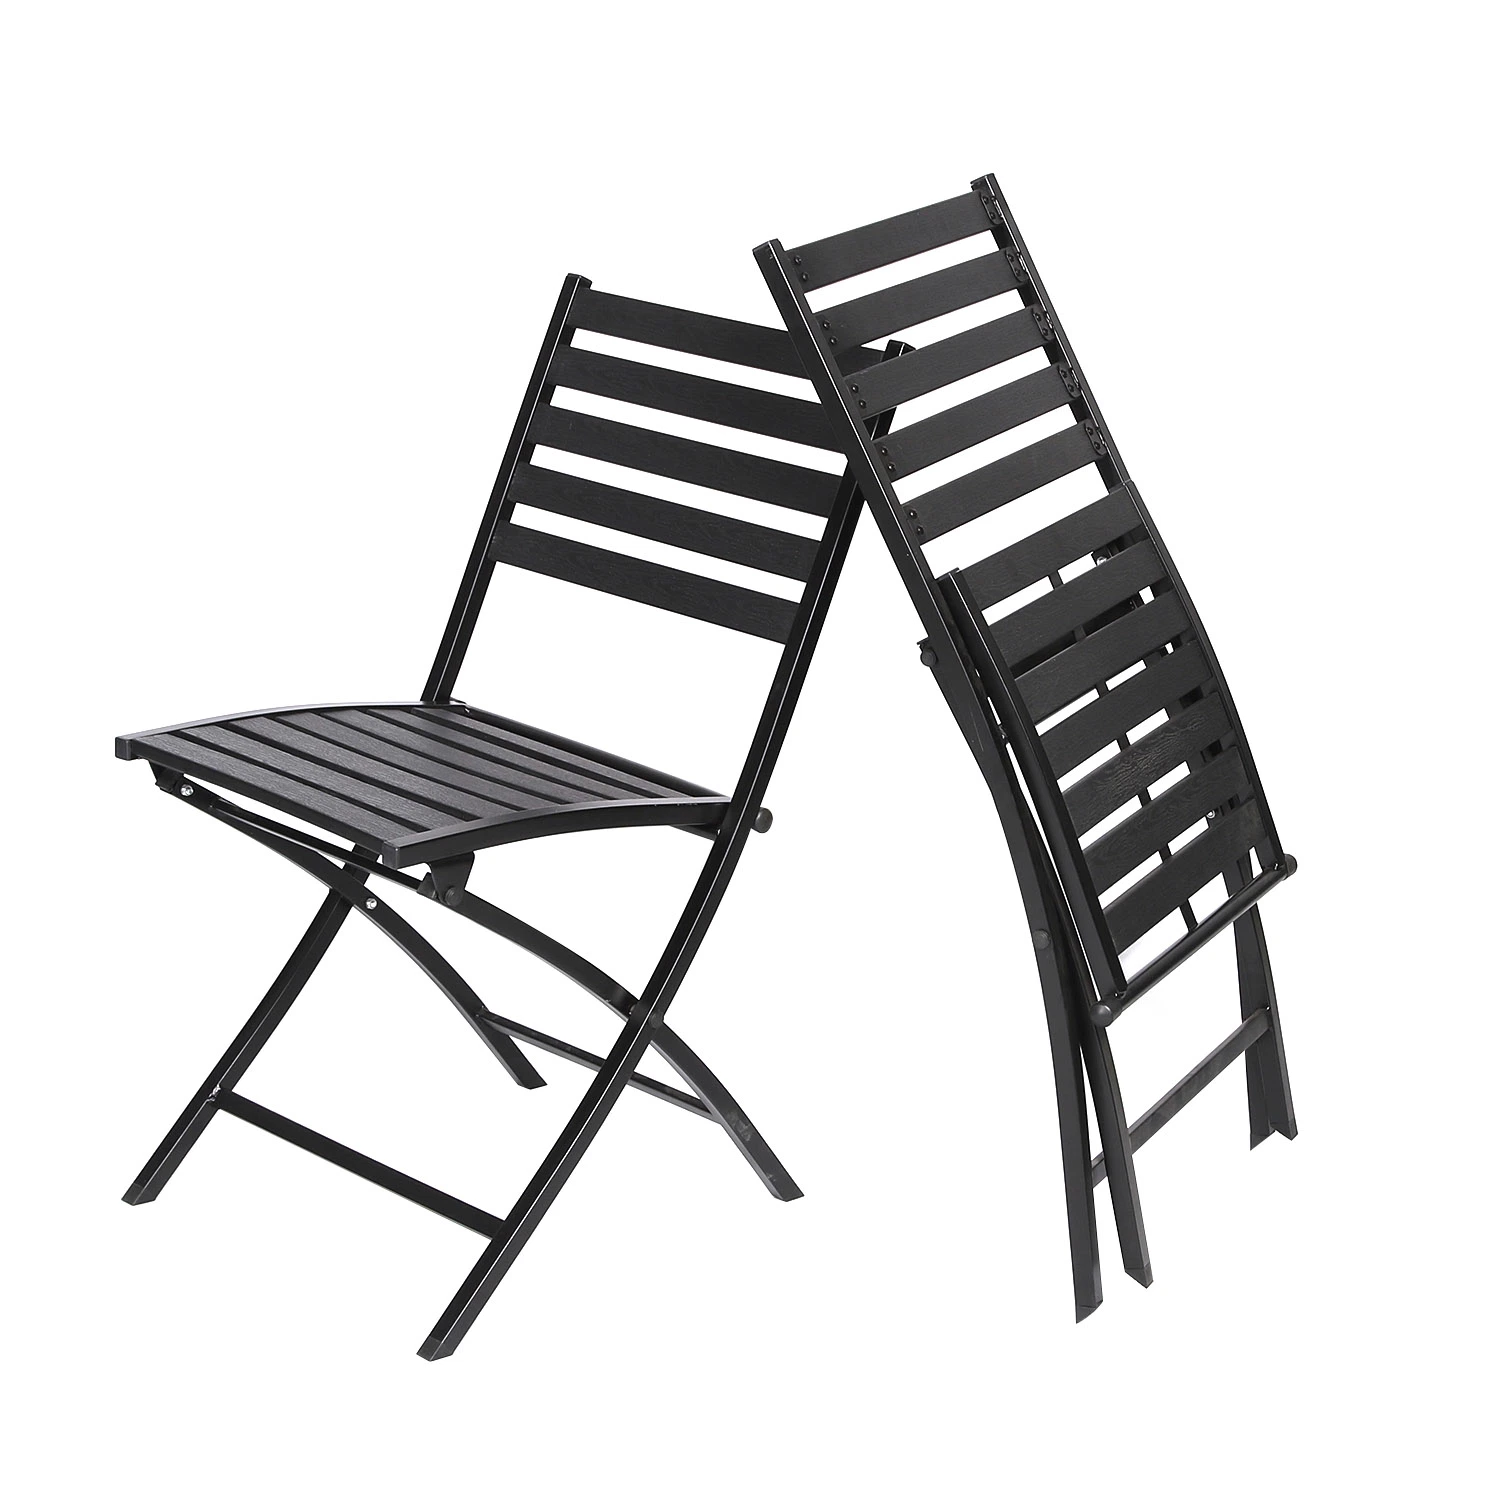 Modern French Small Black Metal Wooden Outdoor Cafe Dining Chairs Bistro Garden Furniture Patio Folding Chair on Sale